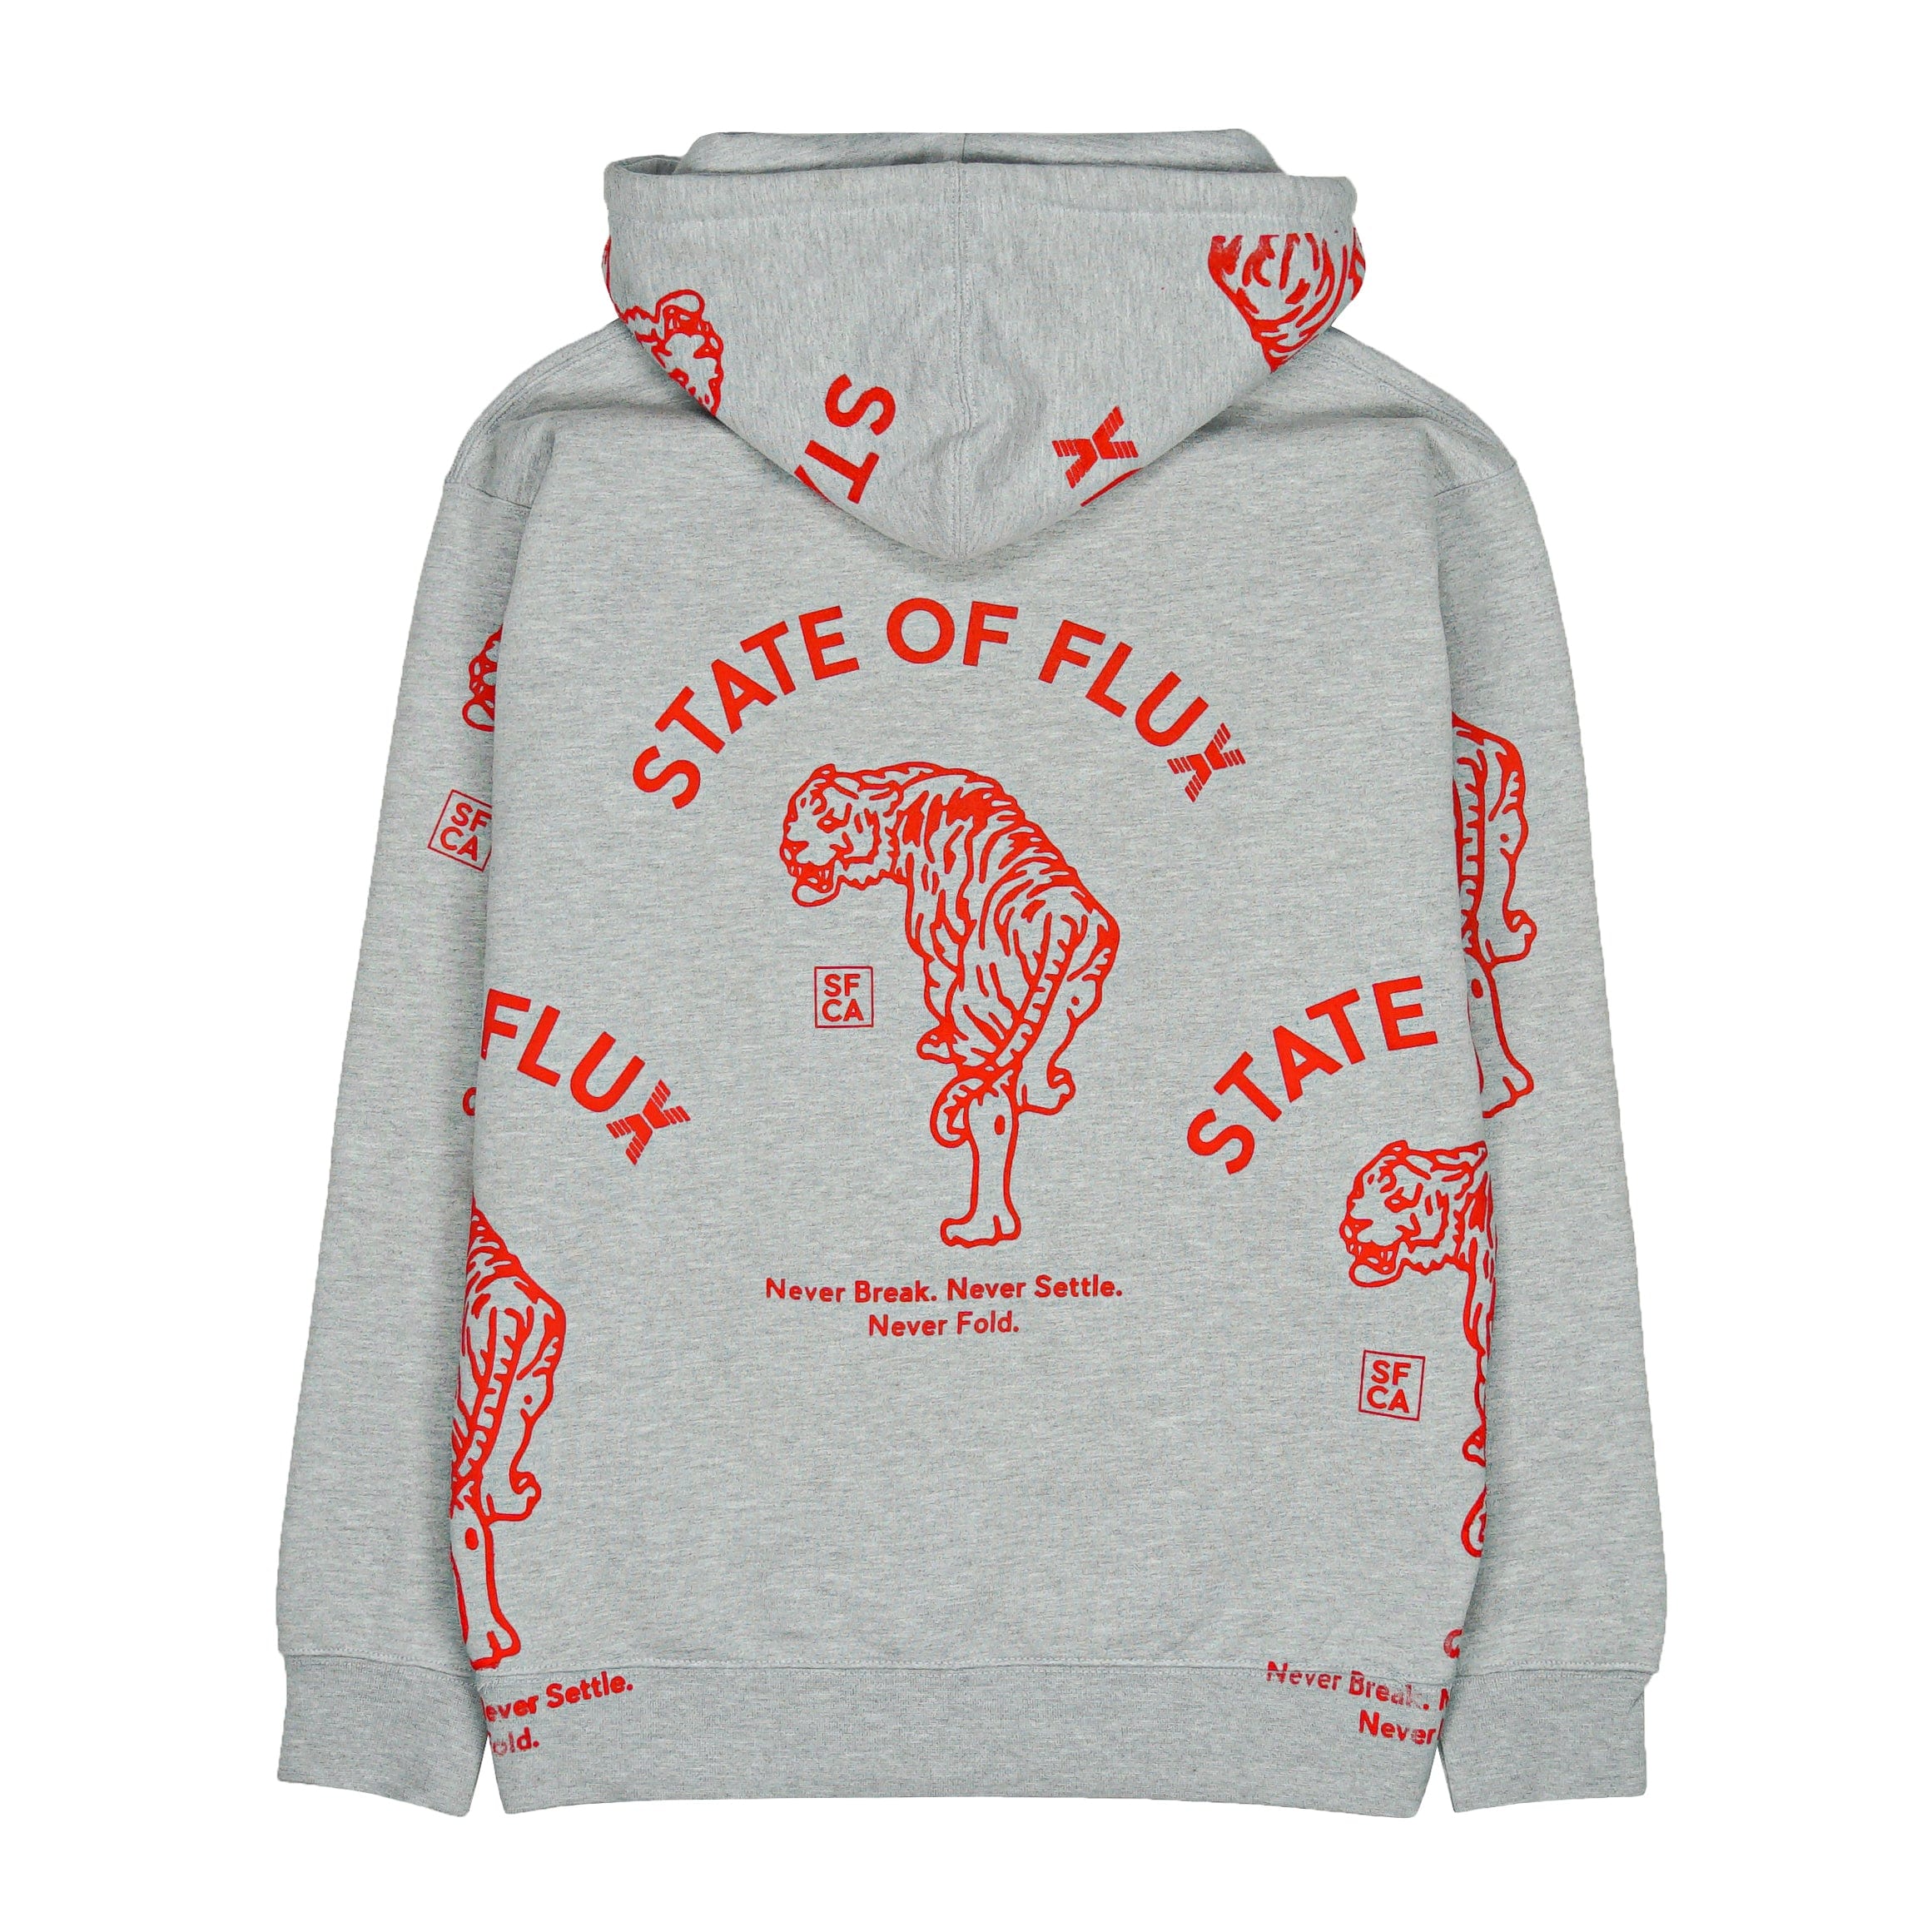 Allover Prowler Hoodie in heather grey and red